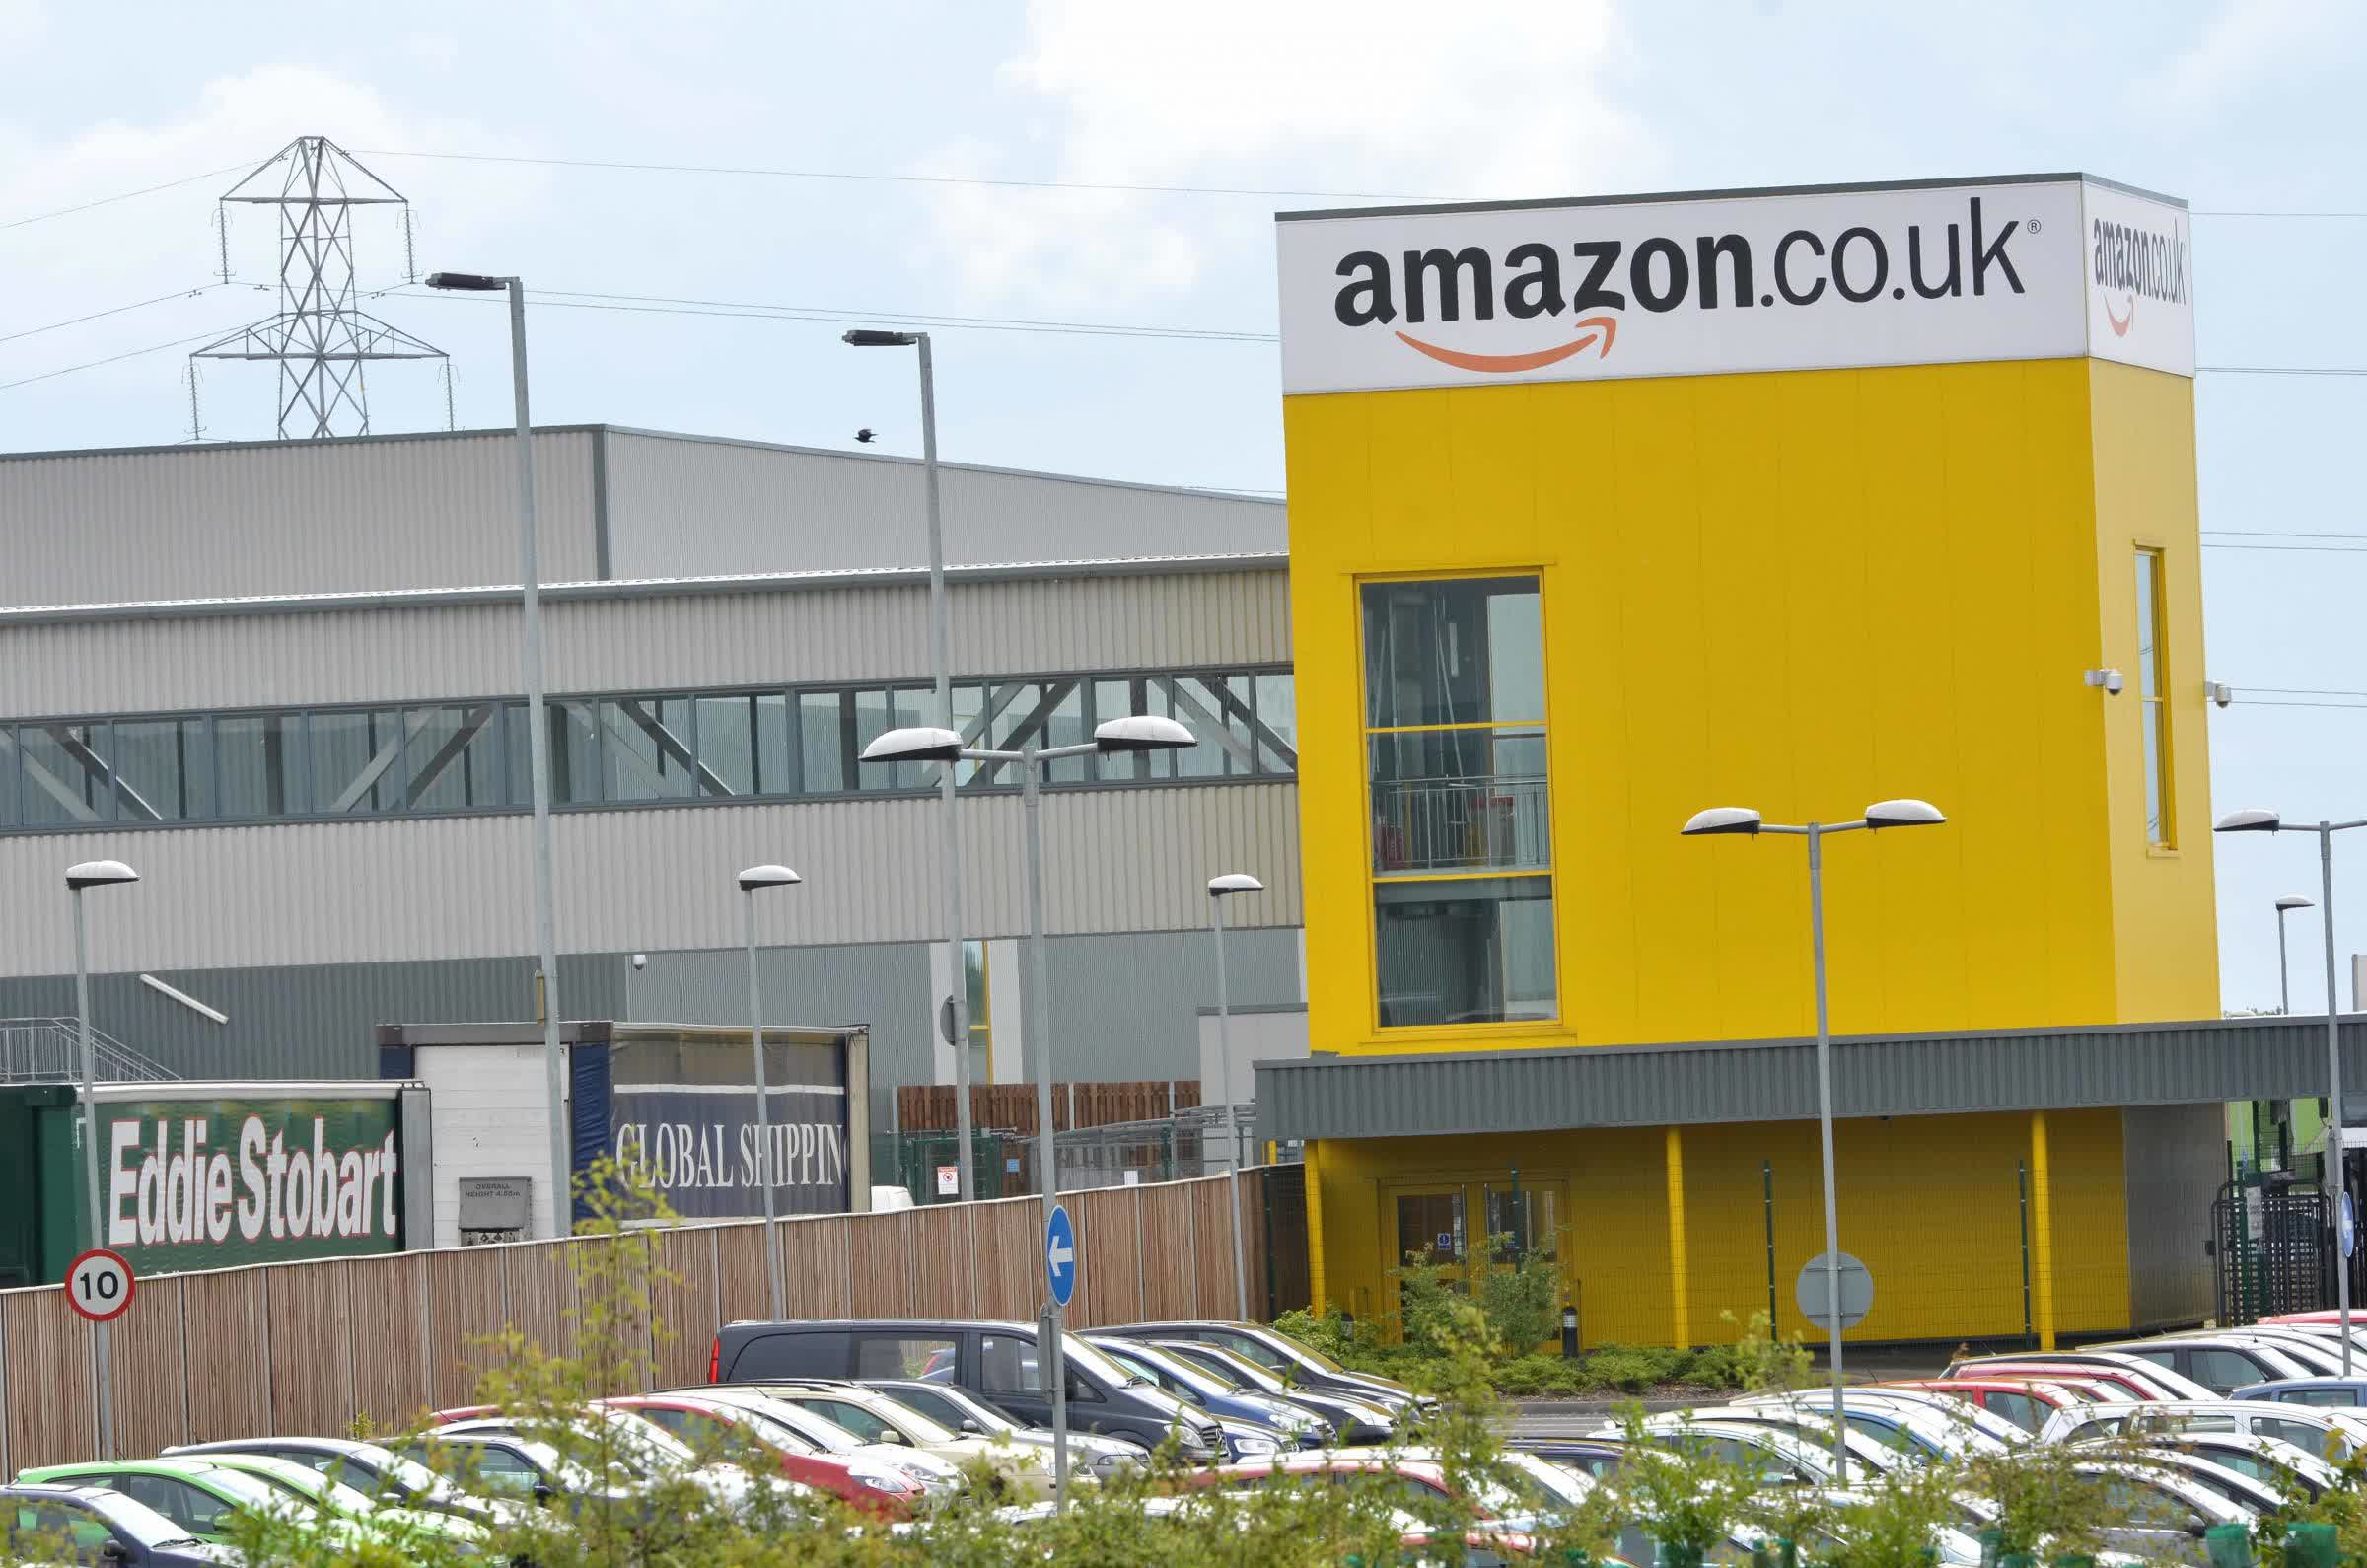 Amazon destroys up to 200,000 items of unsold stock per week at its Dunfermline warehouse